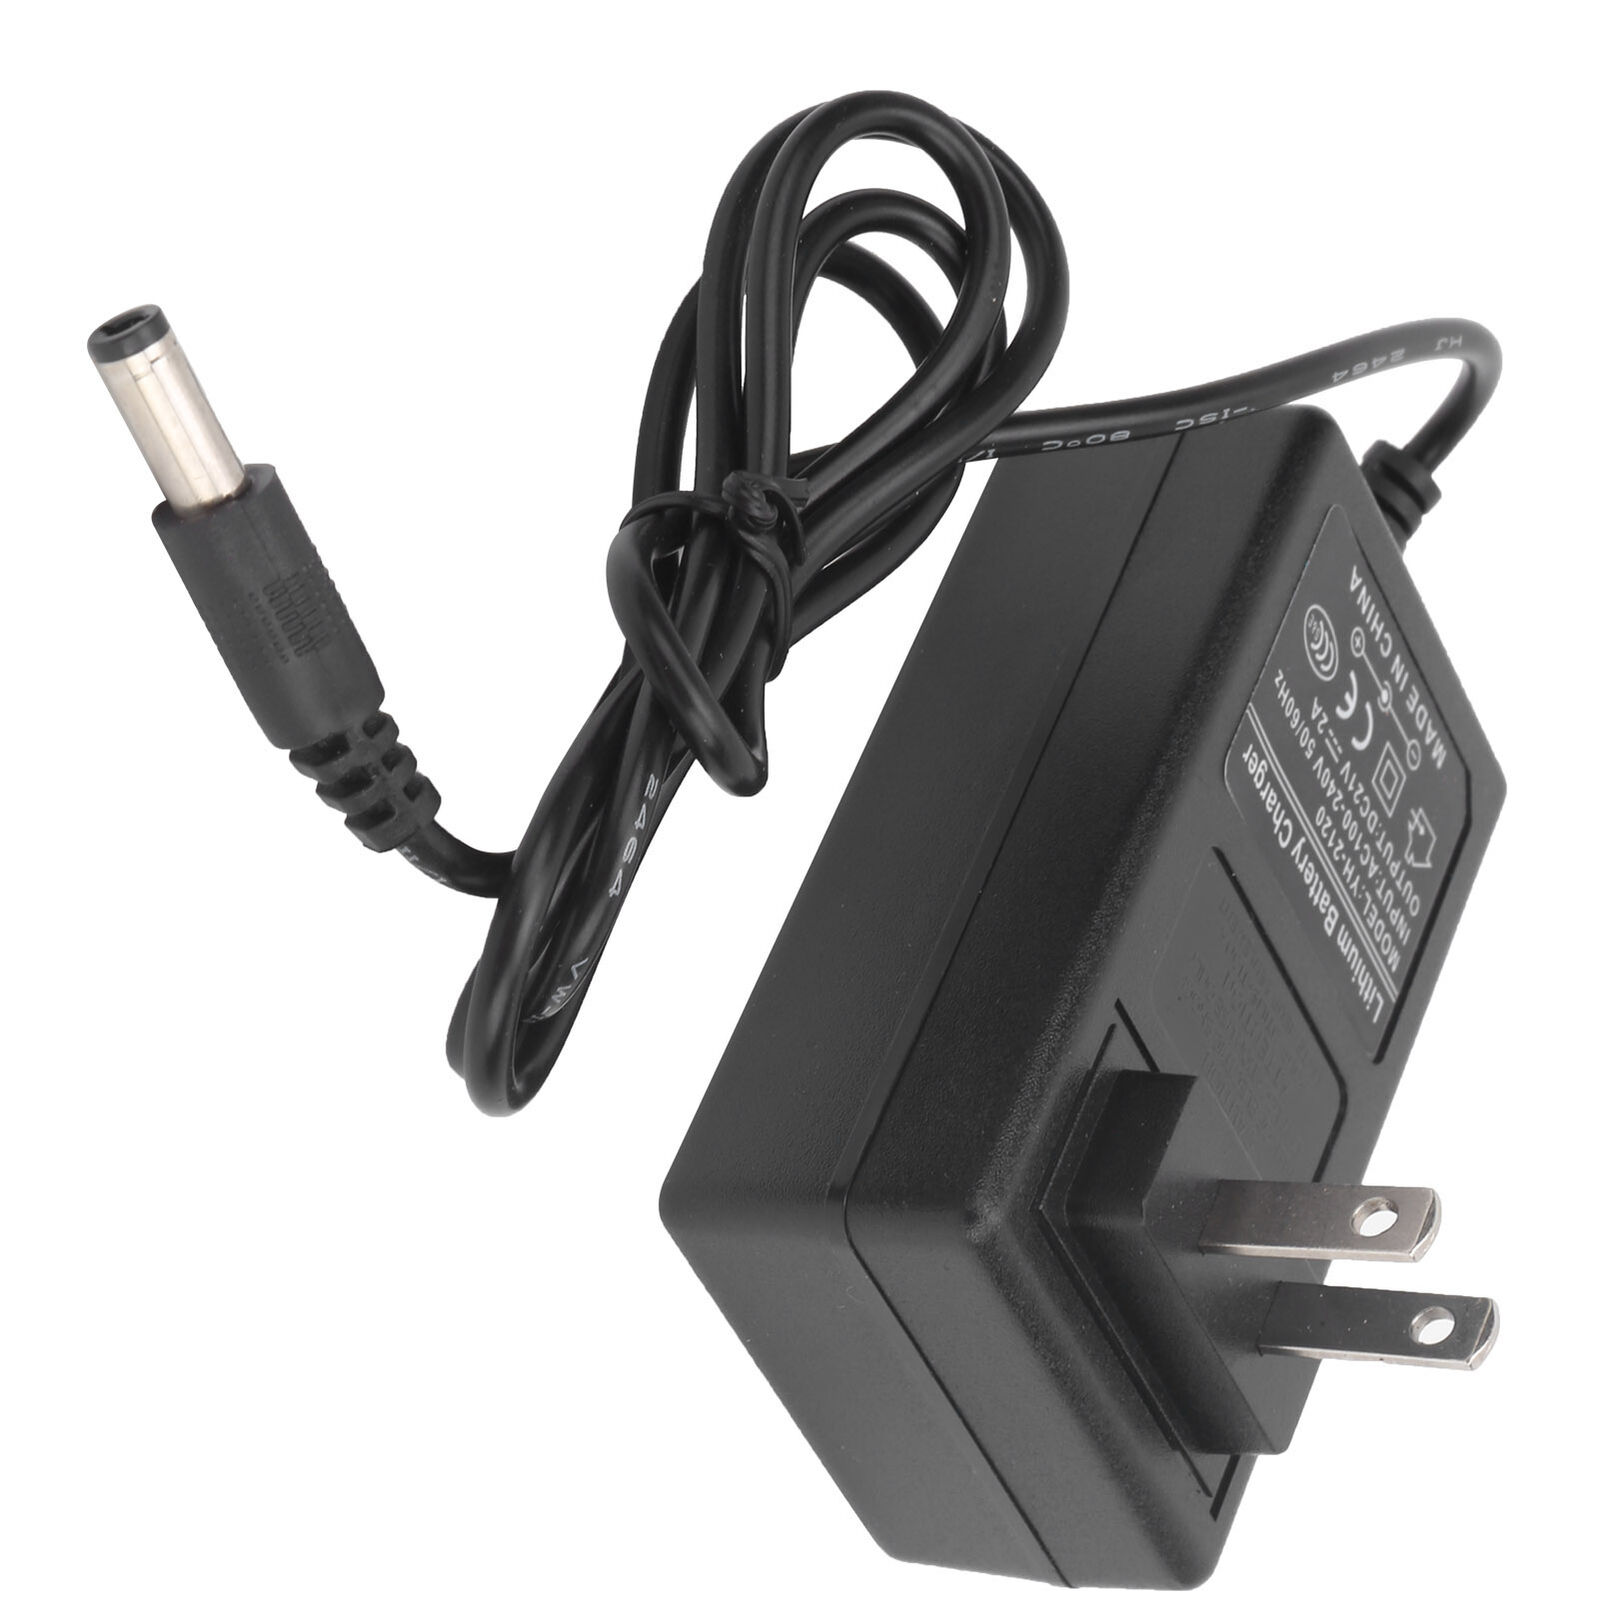 *Brand NEW* Korg PS60 Performance Synthesizer AC/DC Adapter Power Supply Cord Cable PS